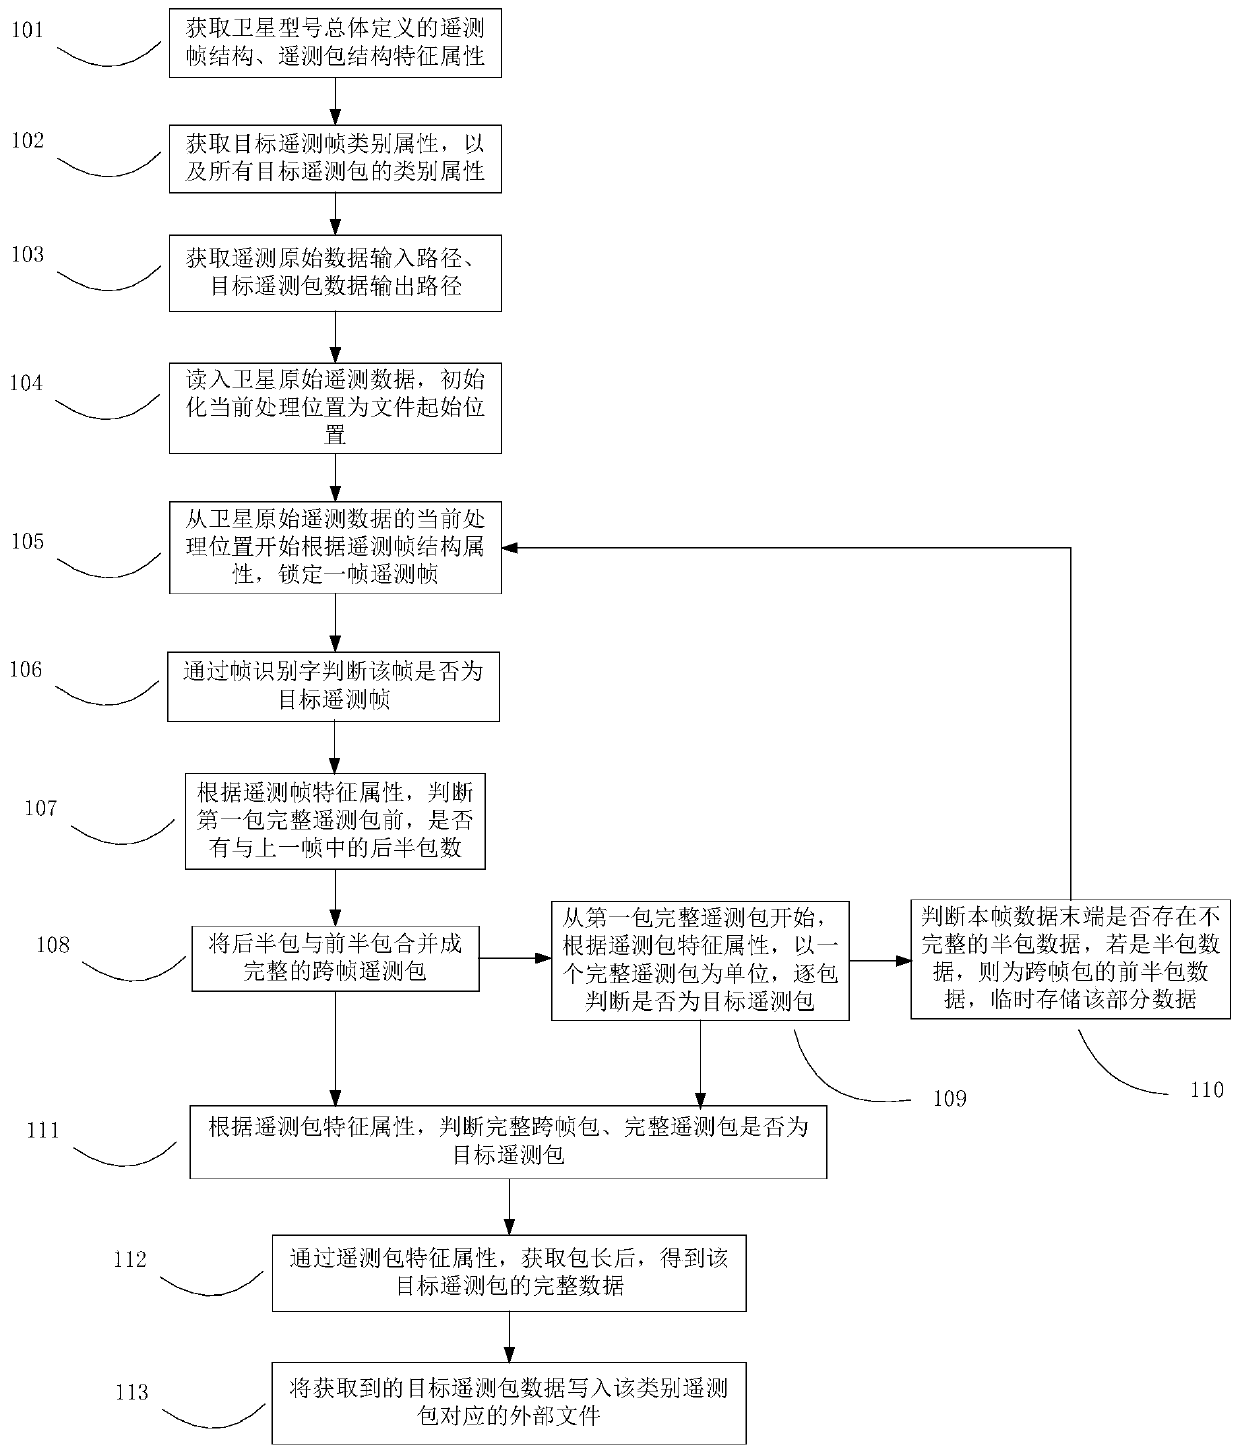 CCSDS system satellite telemetry packet classification extraction method and system, and medium